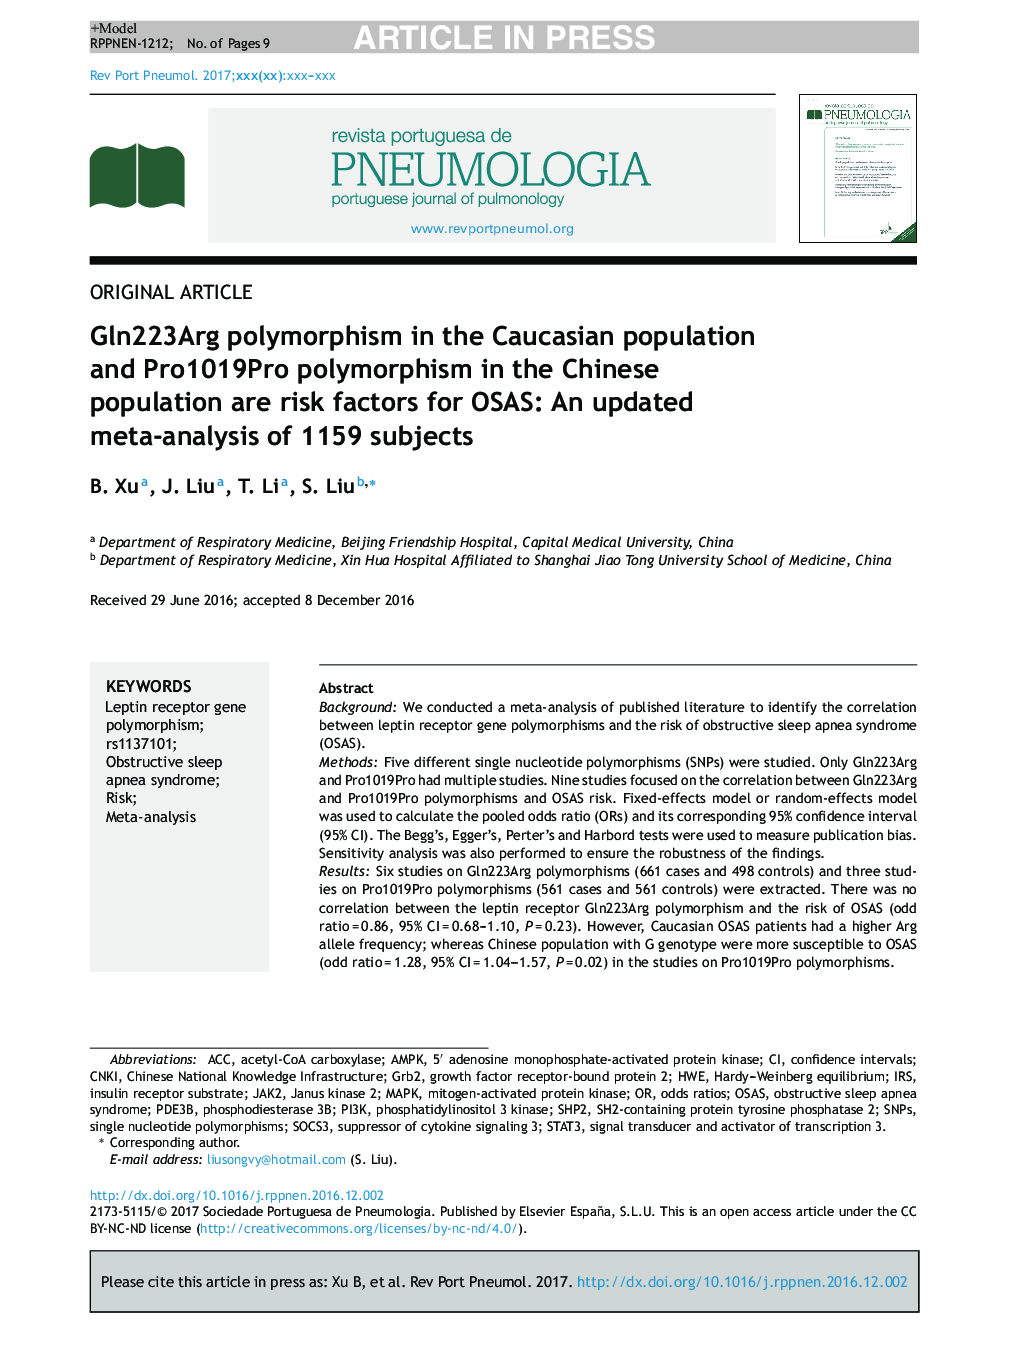 Gln223Arg polymorphism in the Caucasian population and Pro1019Pro polymorphism in the Chinese population are risk factors for OSAS: An updated meta-analysis of 1159 subjects